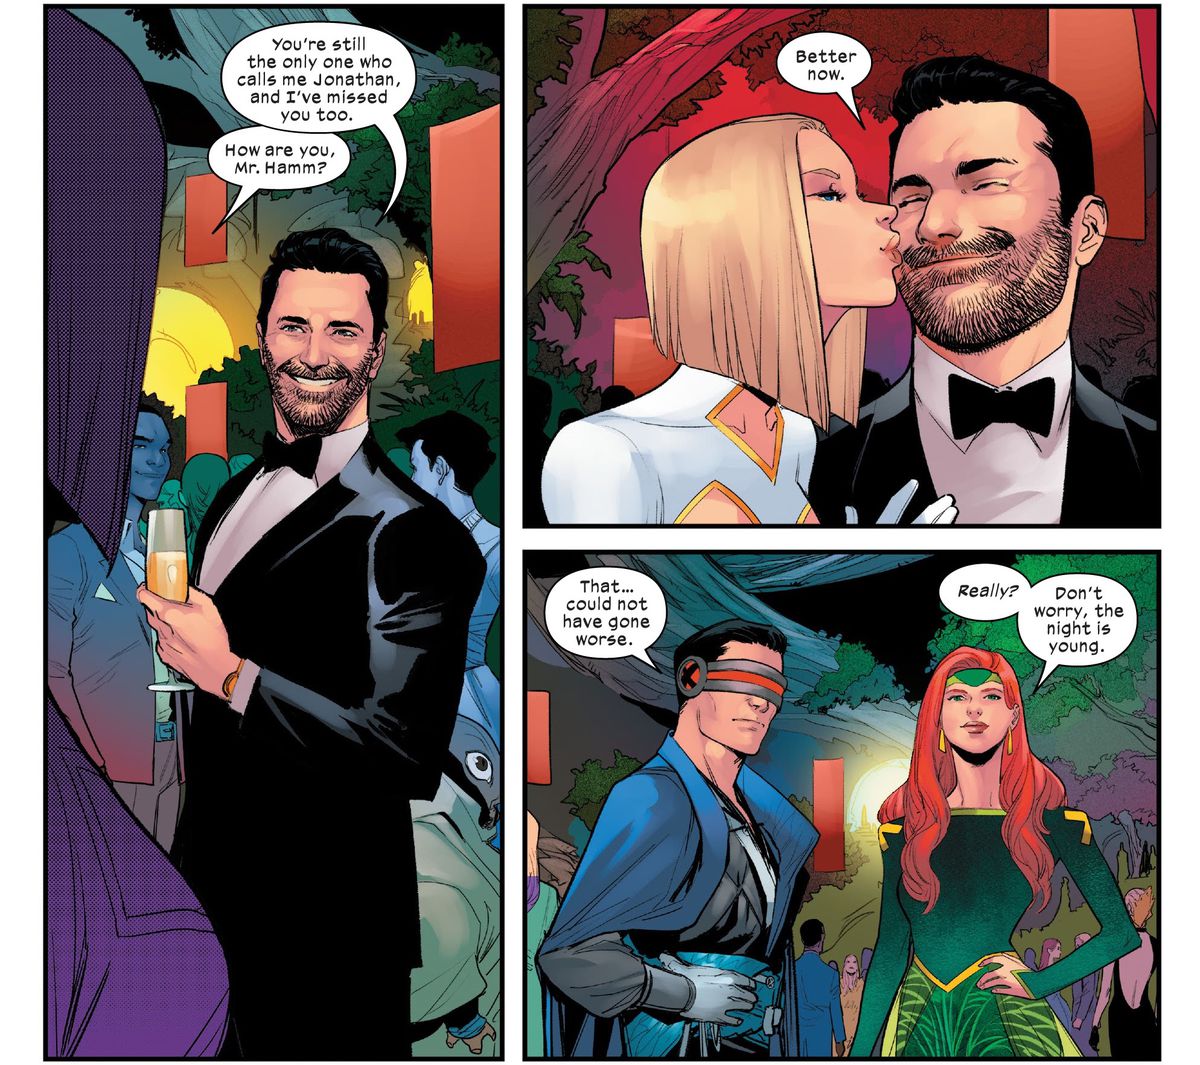 “You’re still the only one who calls me Jonathan, and I’ve missed you too.” Jon Hamm and Emma Frost greet each other with a kiss on the cheek at the X-Men’s Hellfire Gala. “Better now,” he says after the kiss. Both are in black tie dress as Cyclops and Jean Grey look on in X-Men: Hellfire Gala (2022). 